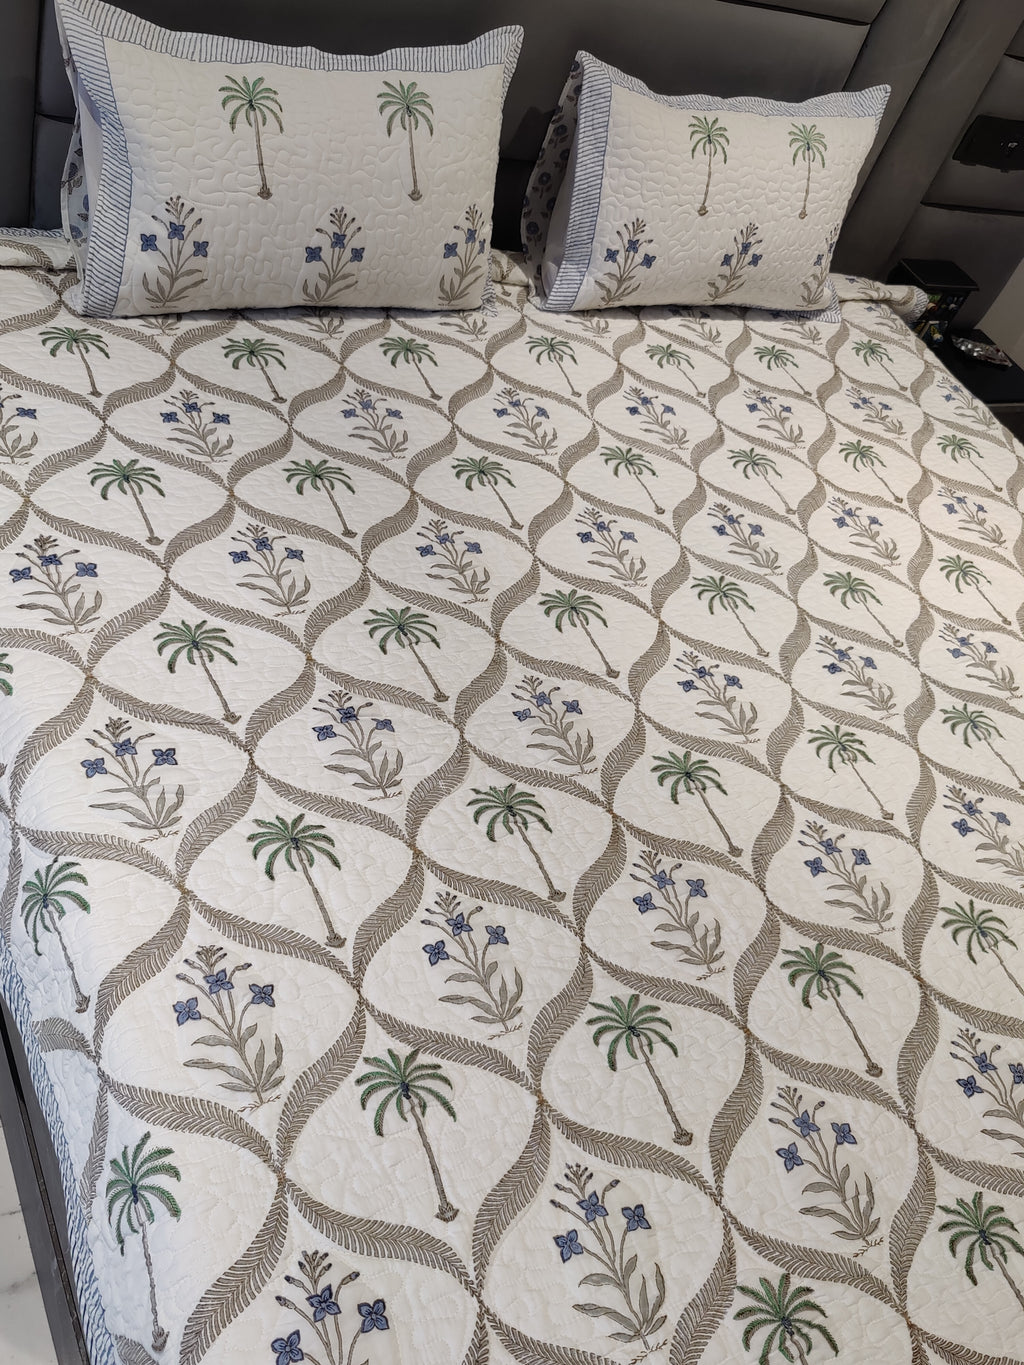 PALM JAAL HANDBLOCK PRINTED QUILTED BEDCOVER